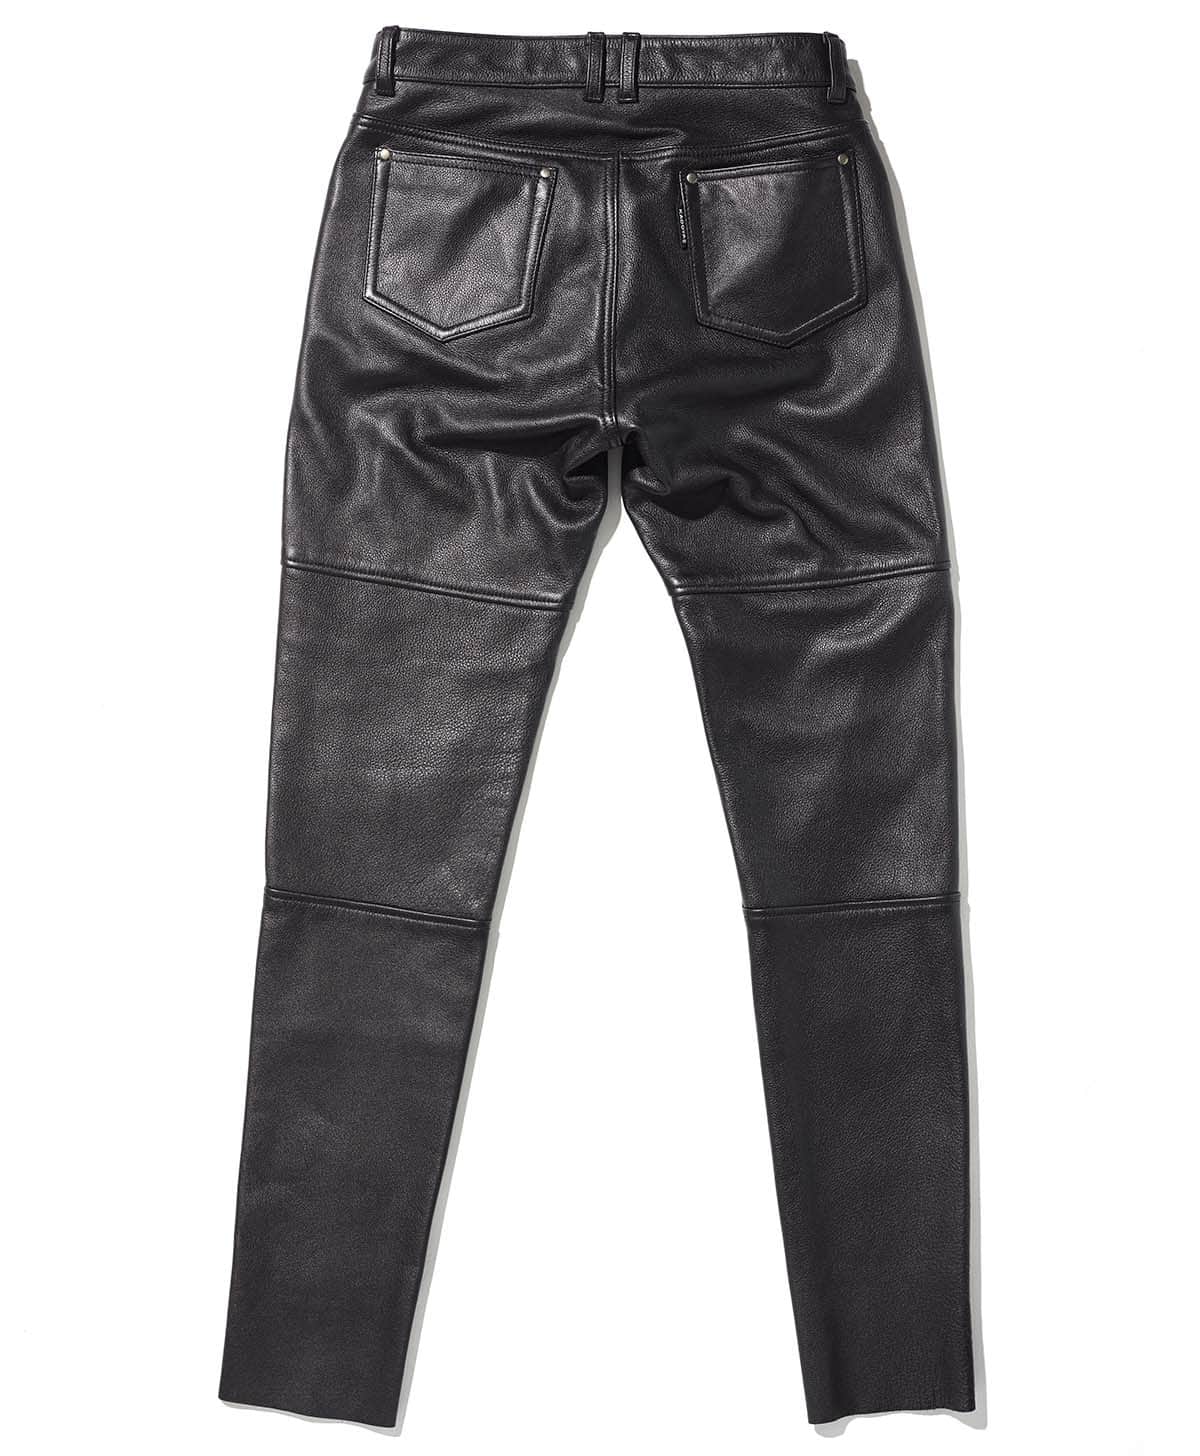 Find Faux Leather Trousers, High-Waisted Ladies Trousers Online at ikrush